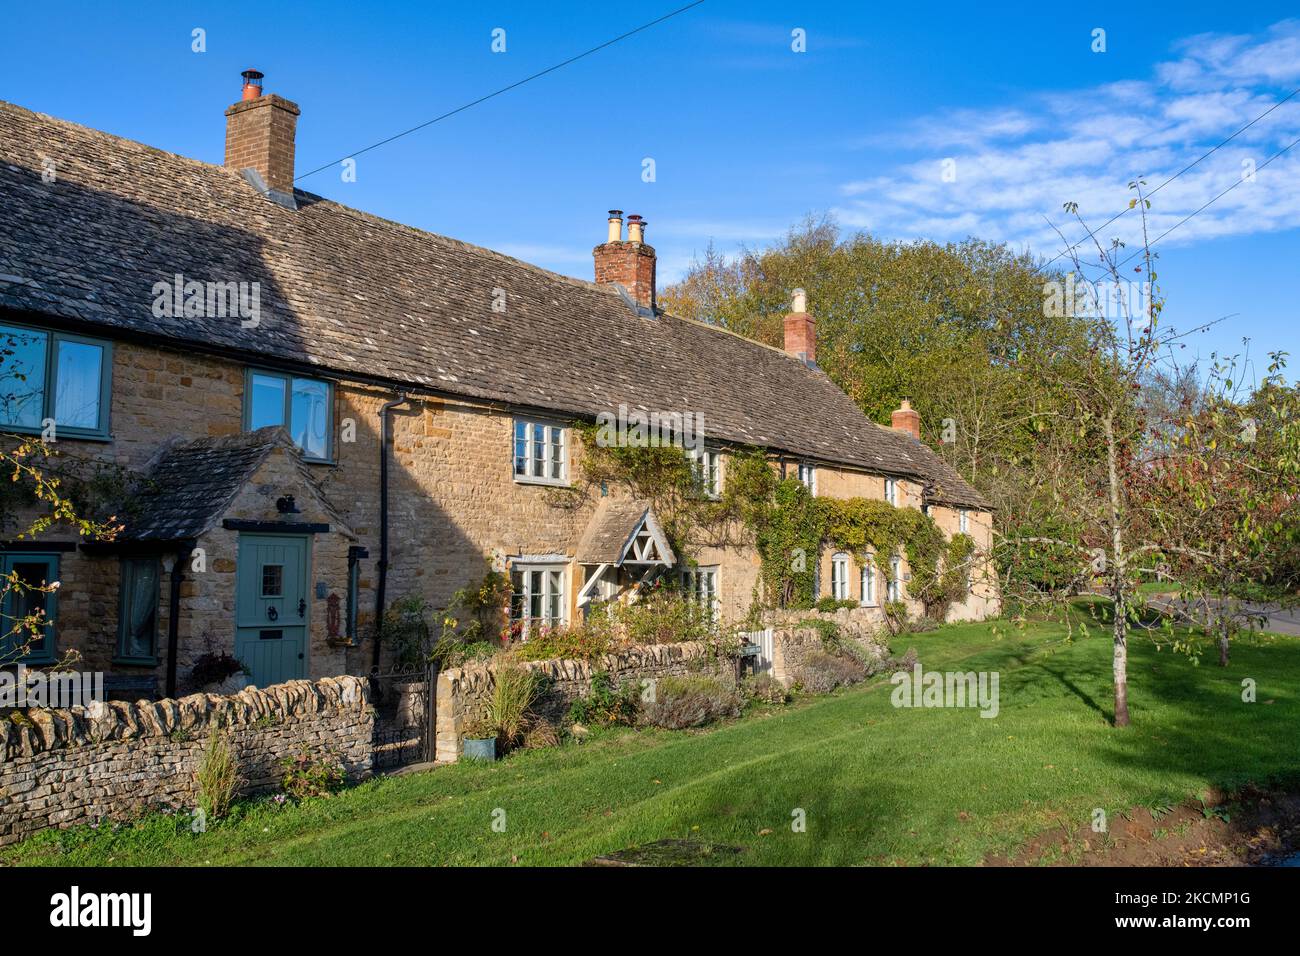 Little Compton cottages in autumn. Little Compton, Warwickshire, England Stock Photo